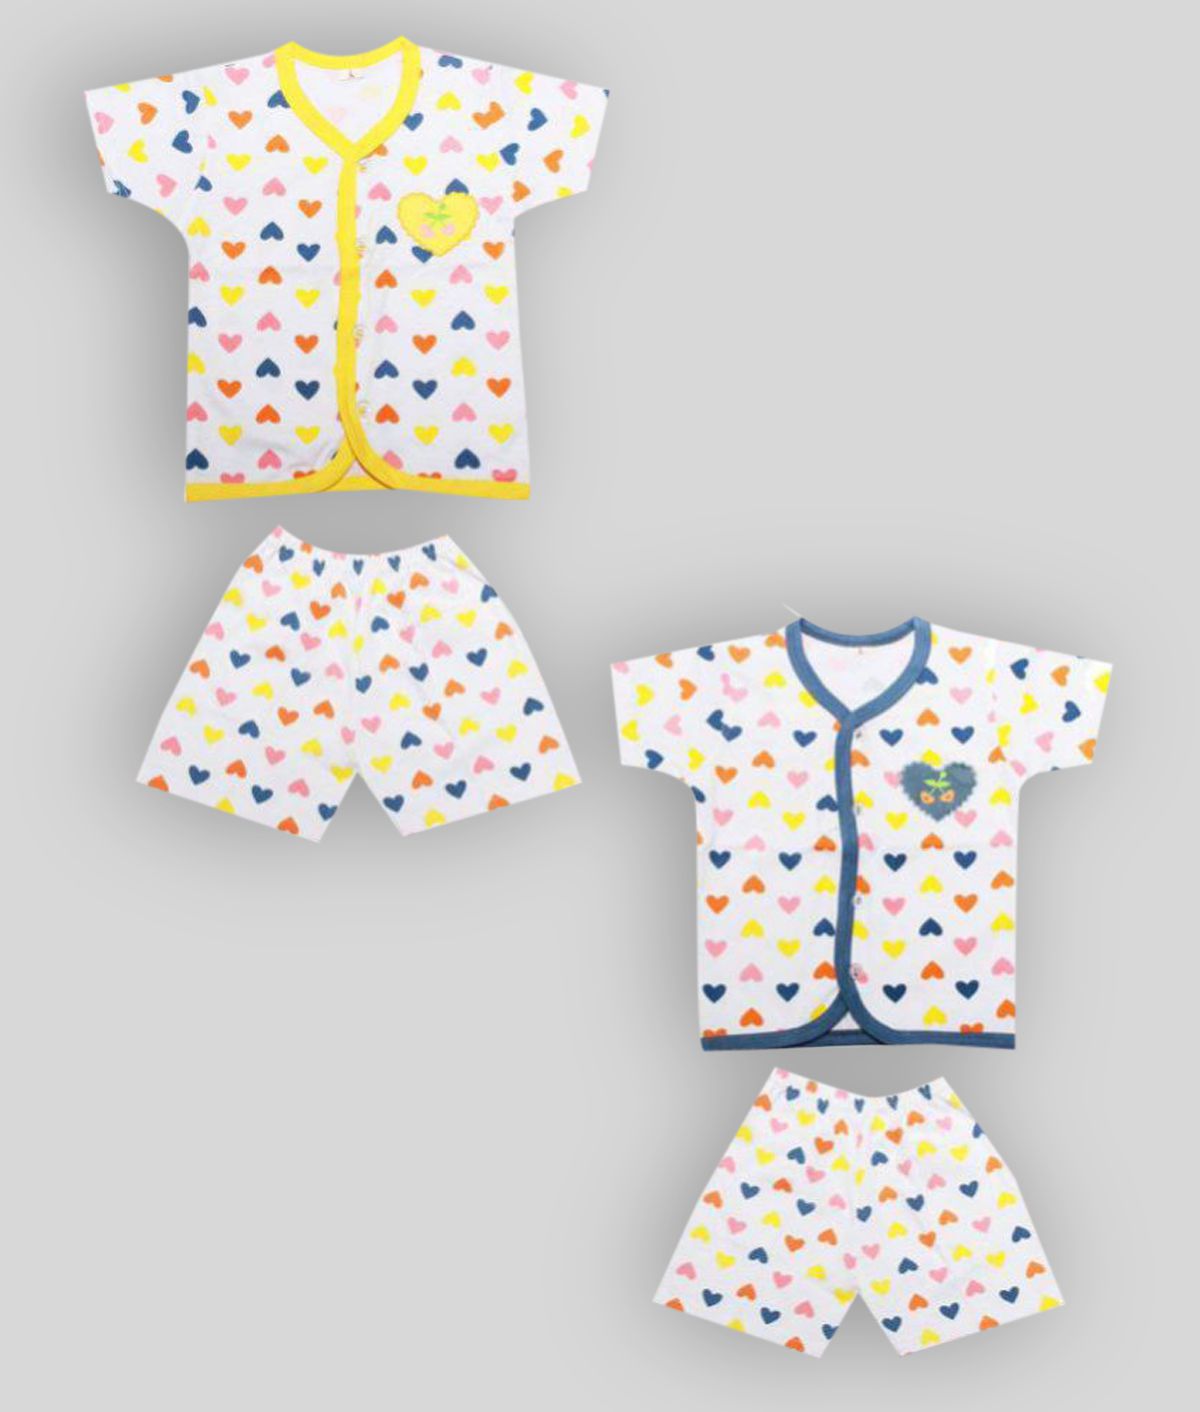     			Babeezworld - Multicolor Cotton T-Shirt & Shorts For Baby Boy,Baby Girl ( Pack of 1 )